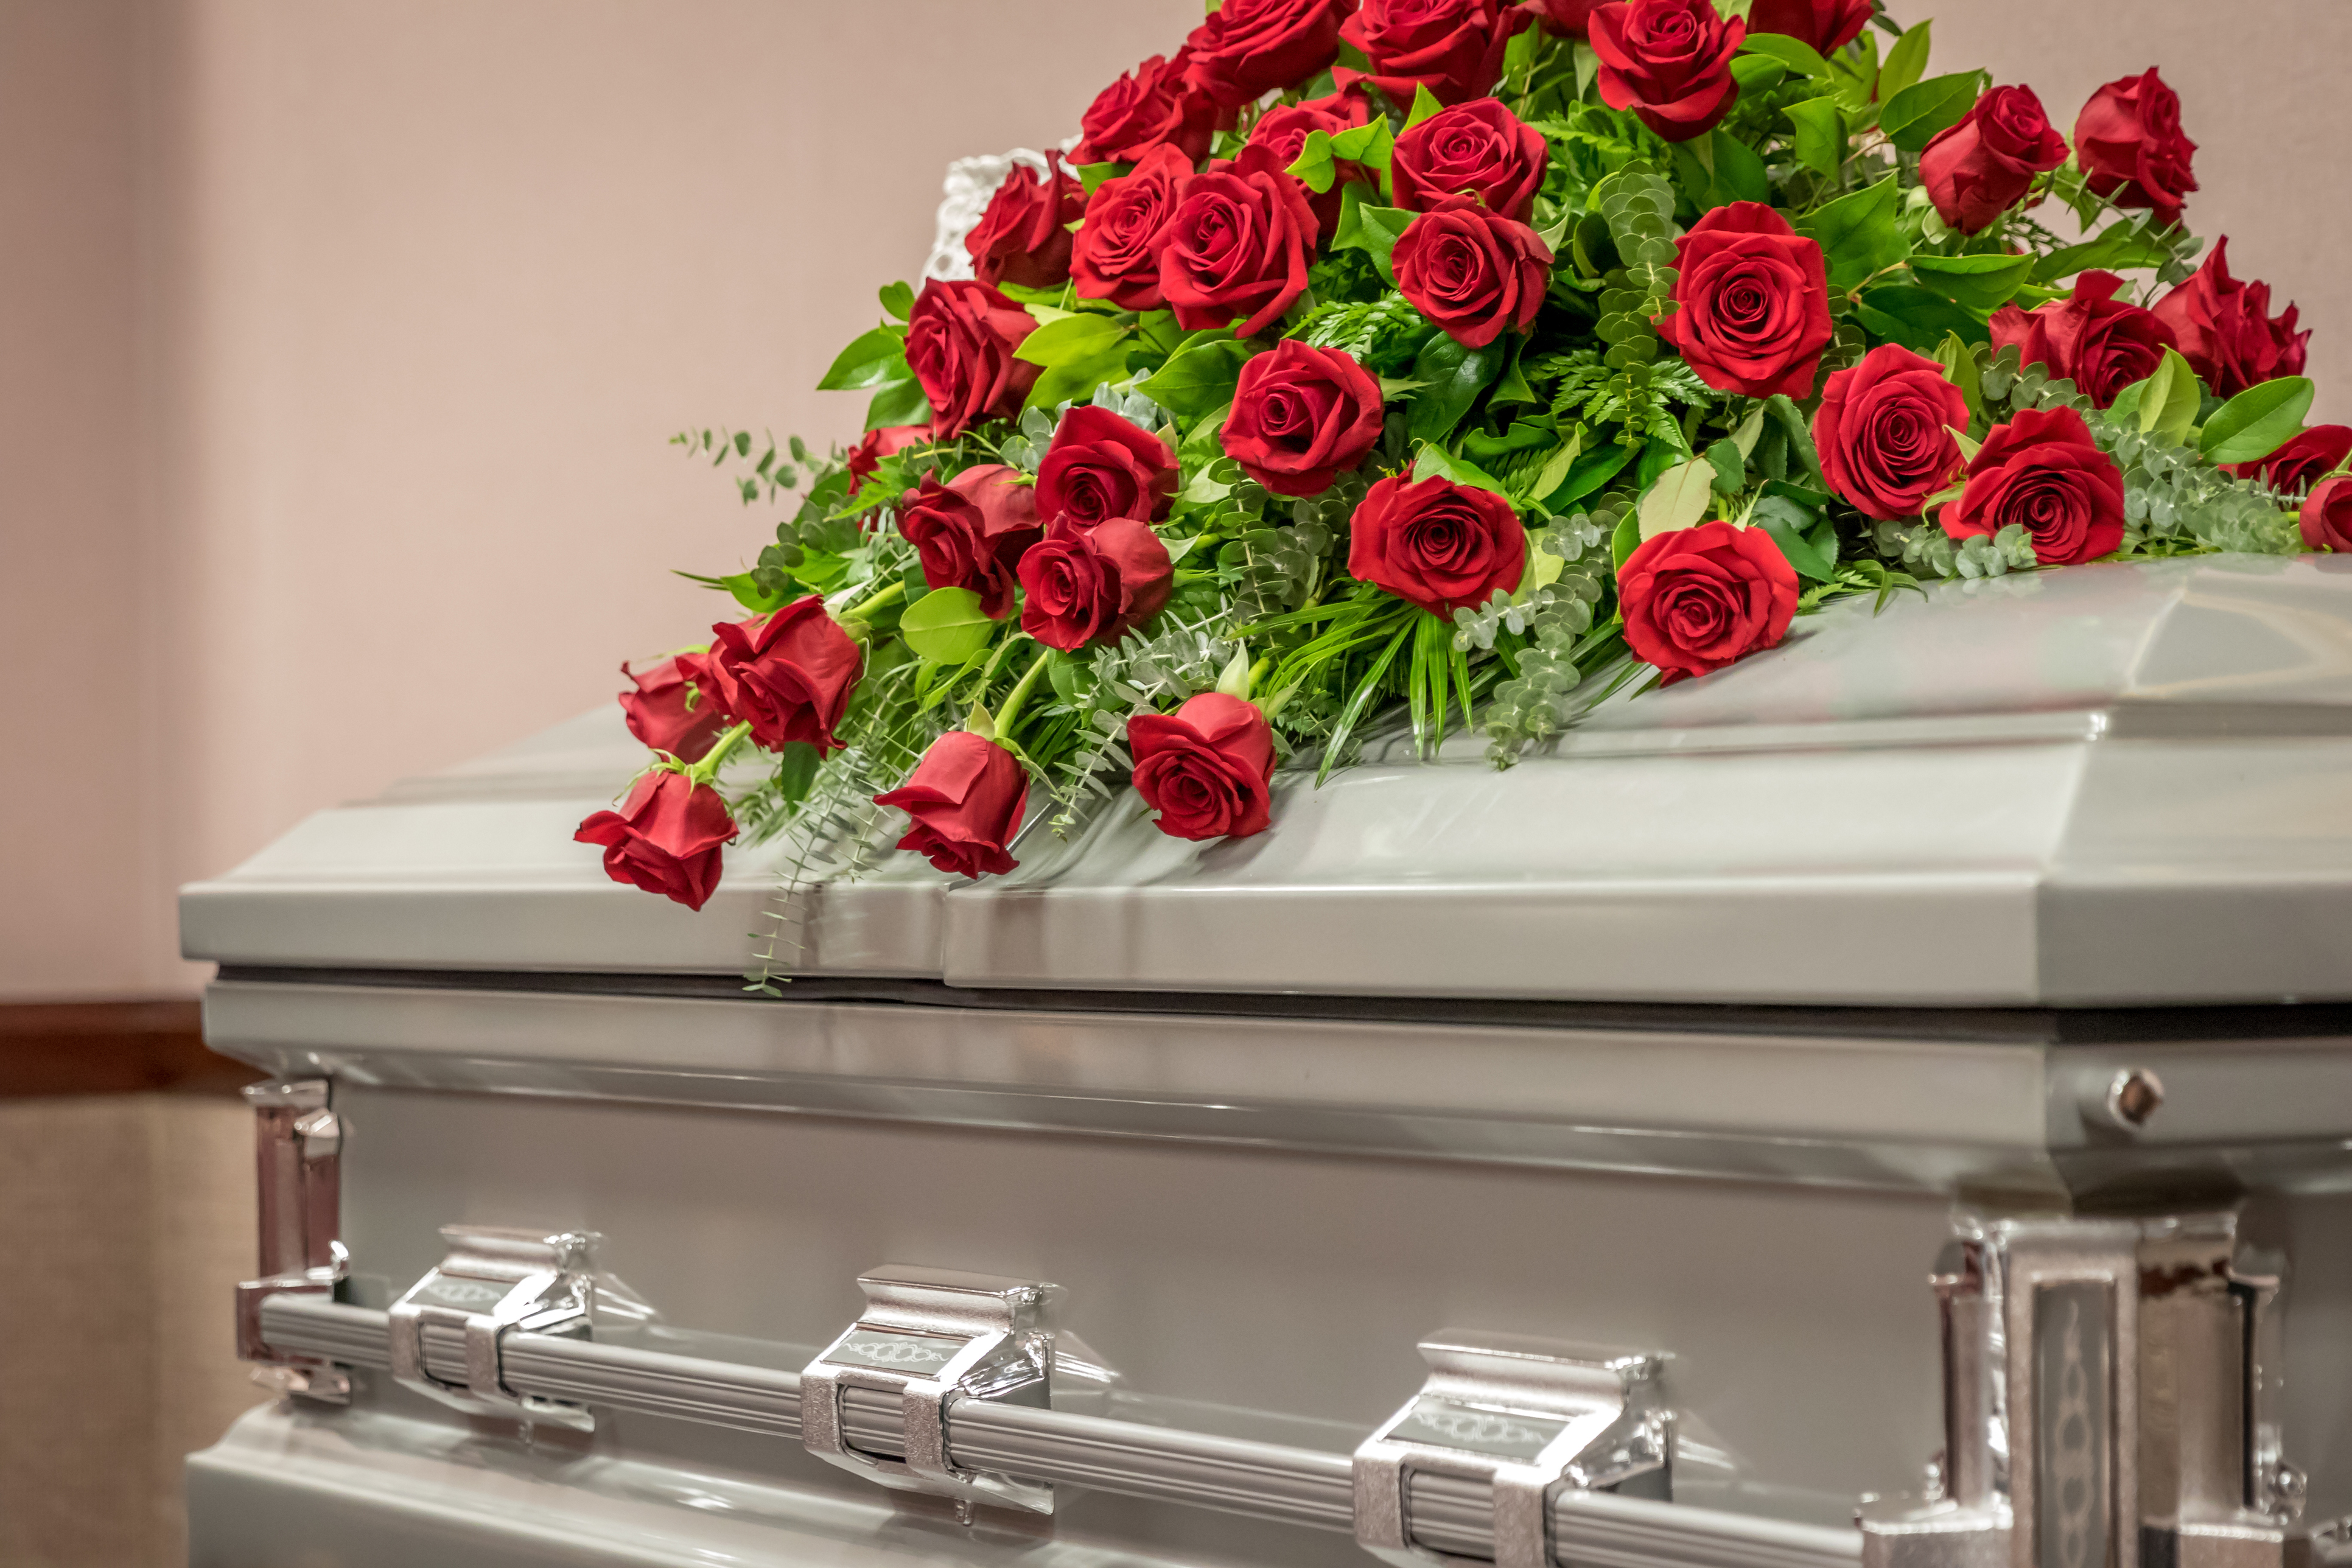 image of casket with roses